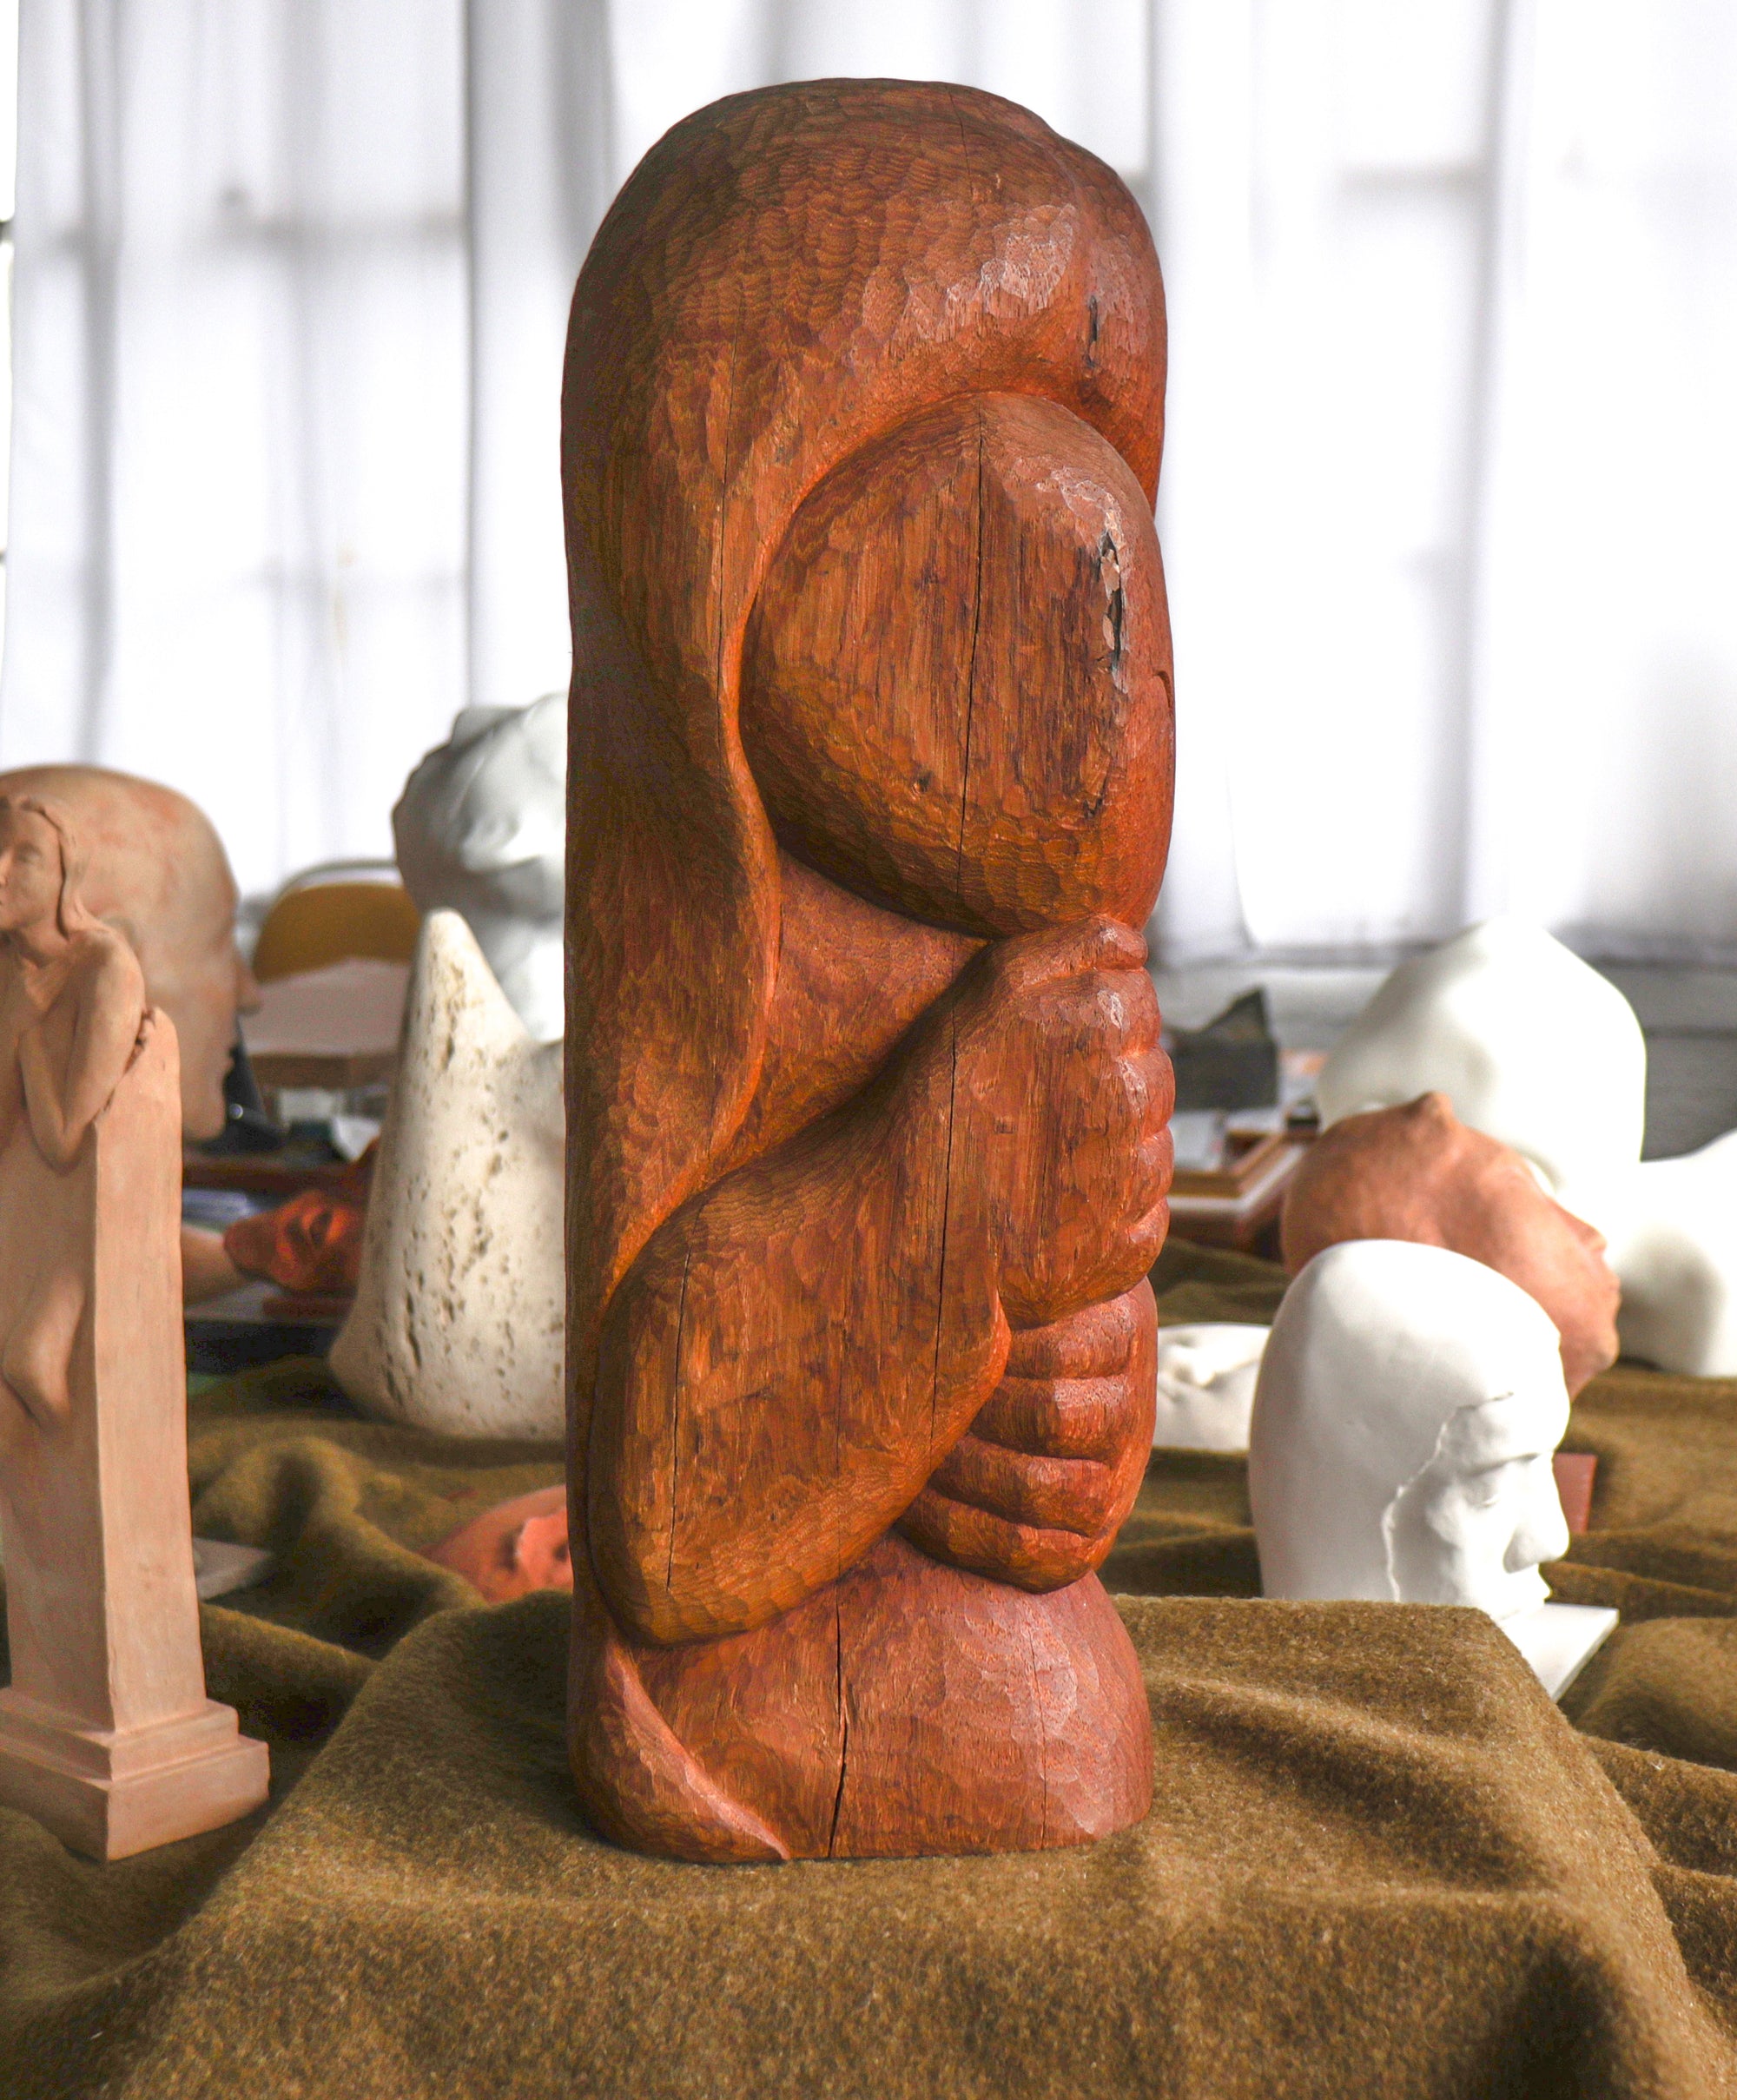 Embracing Figures II <br>20th Century Carved Wood <br><br>#C2832